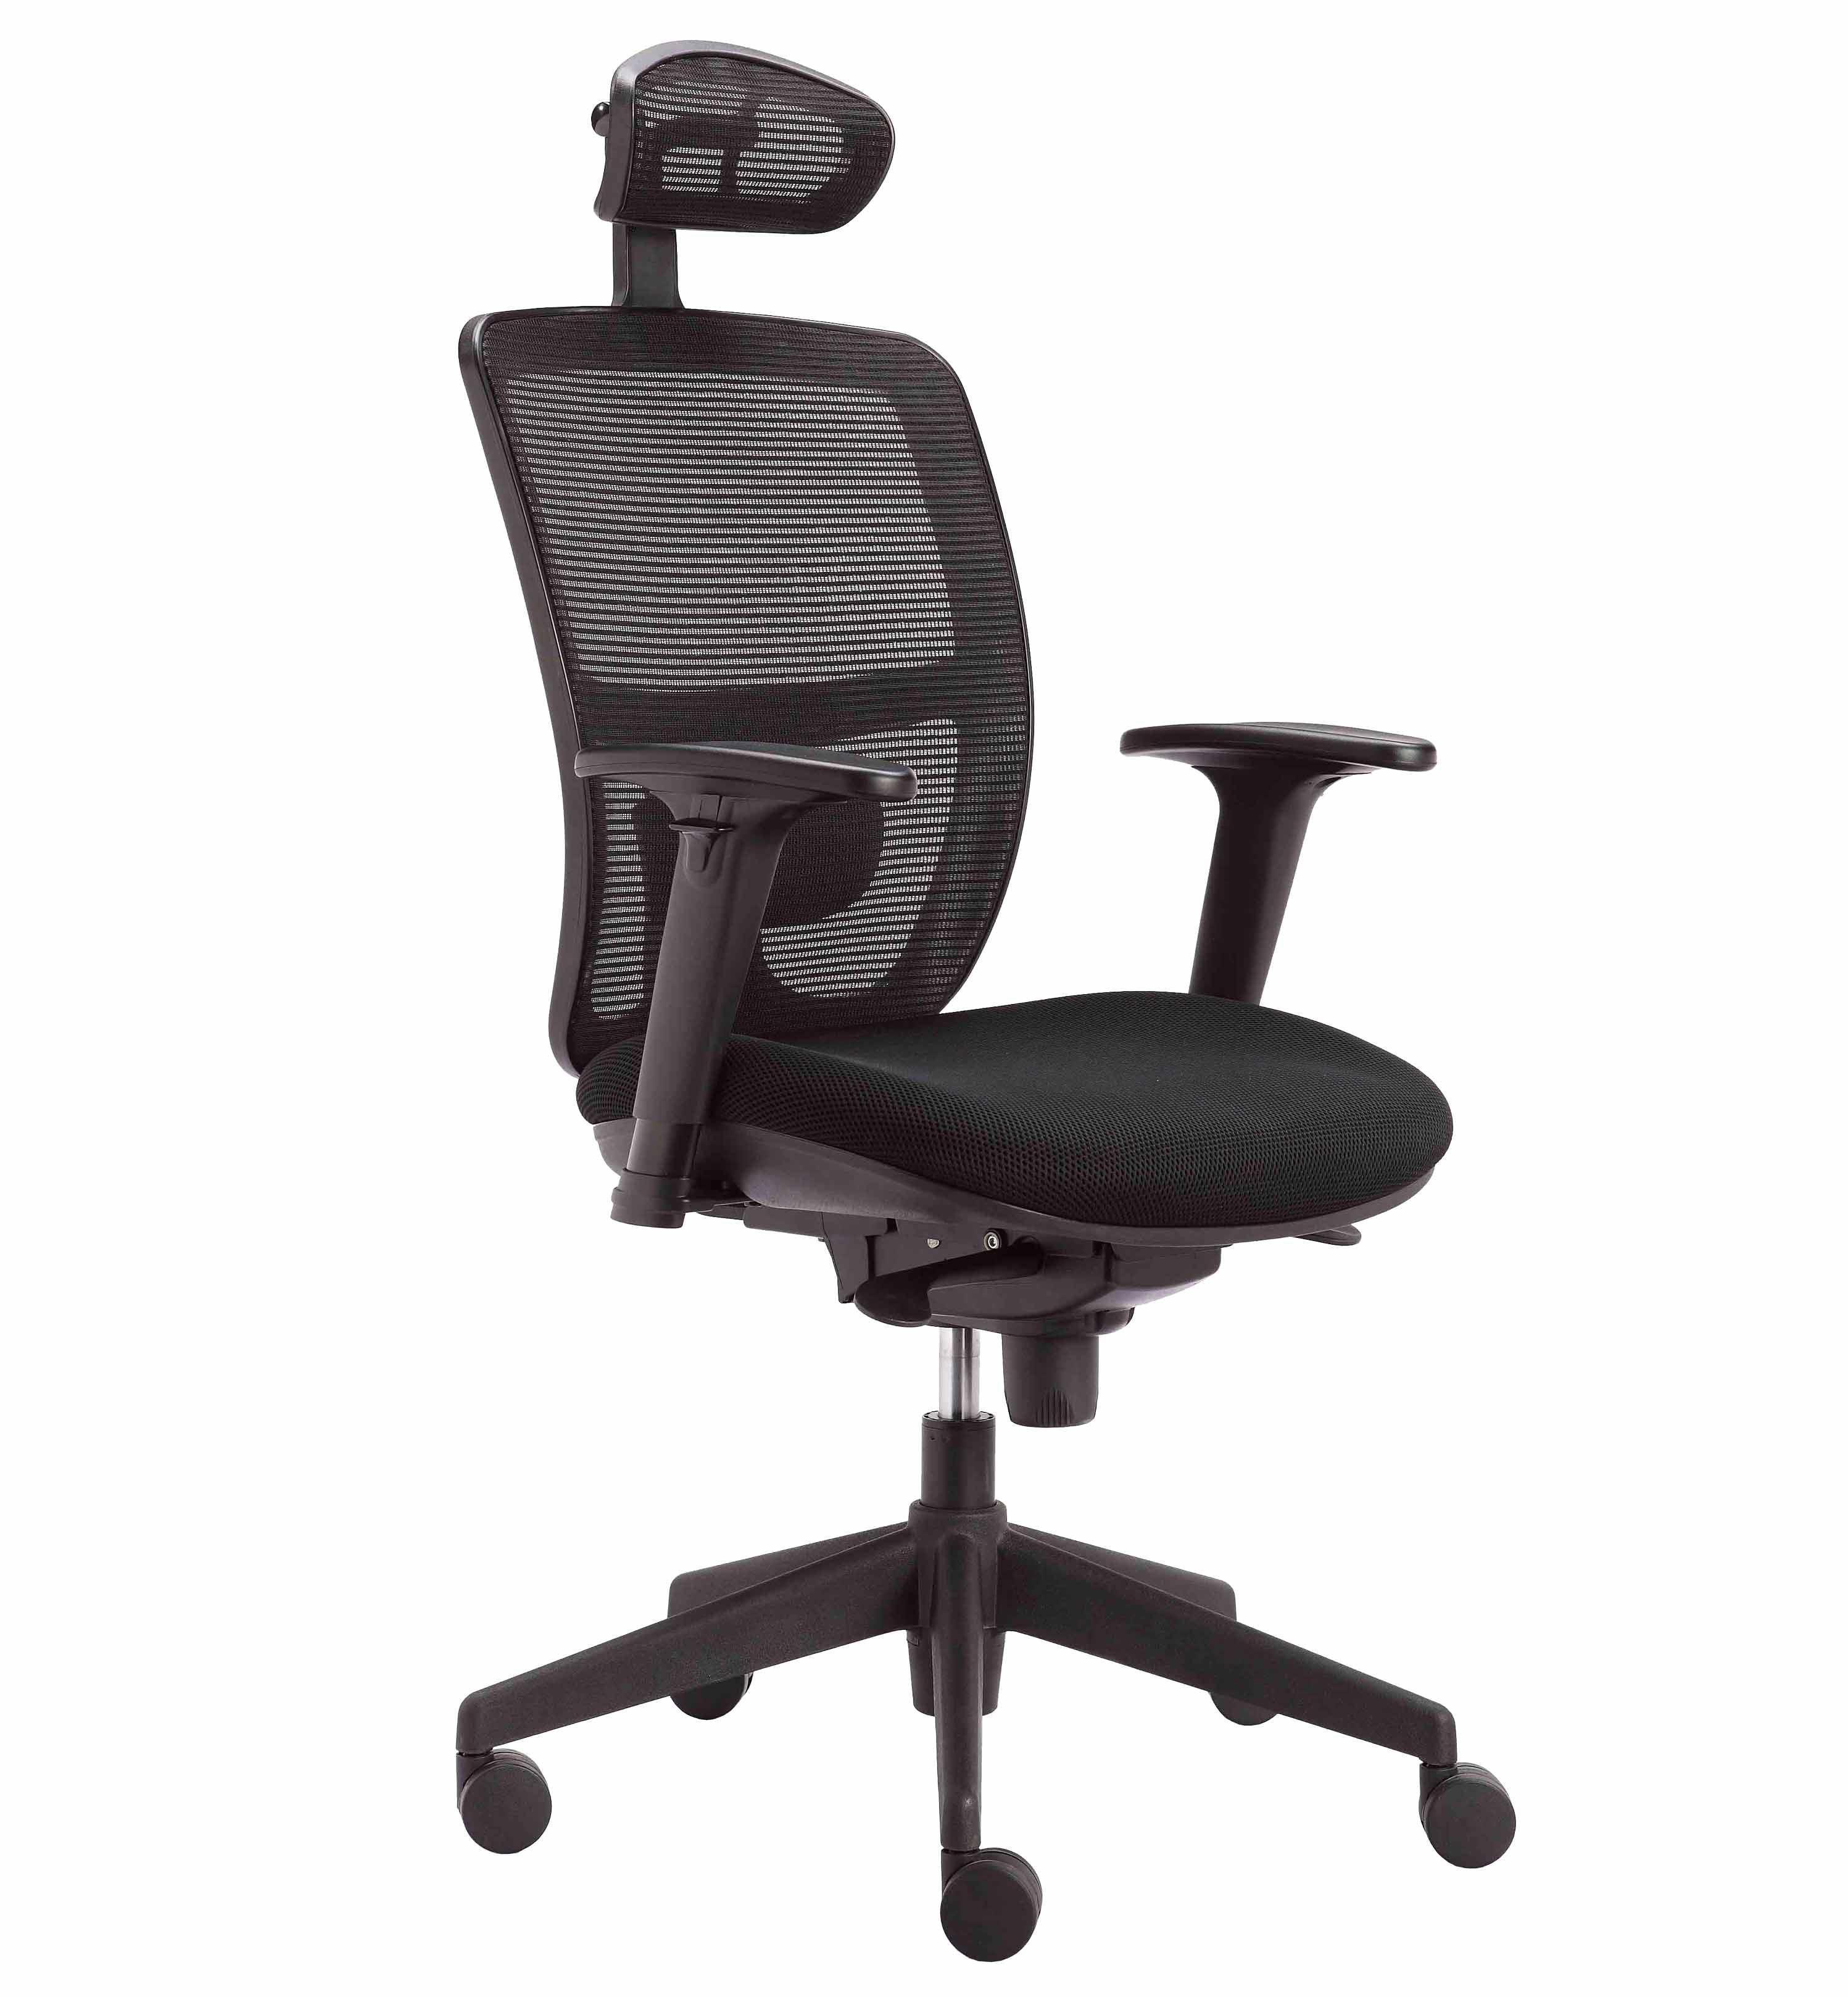 Office chair on white bakground